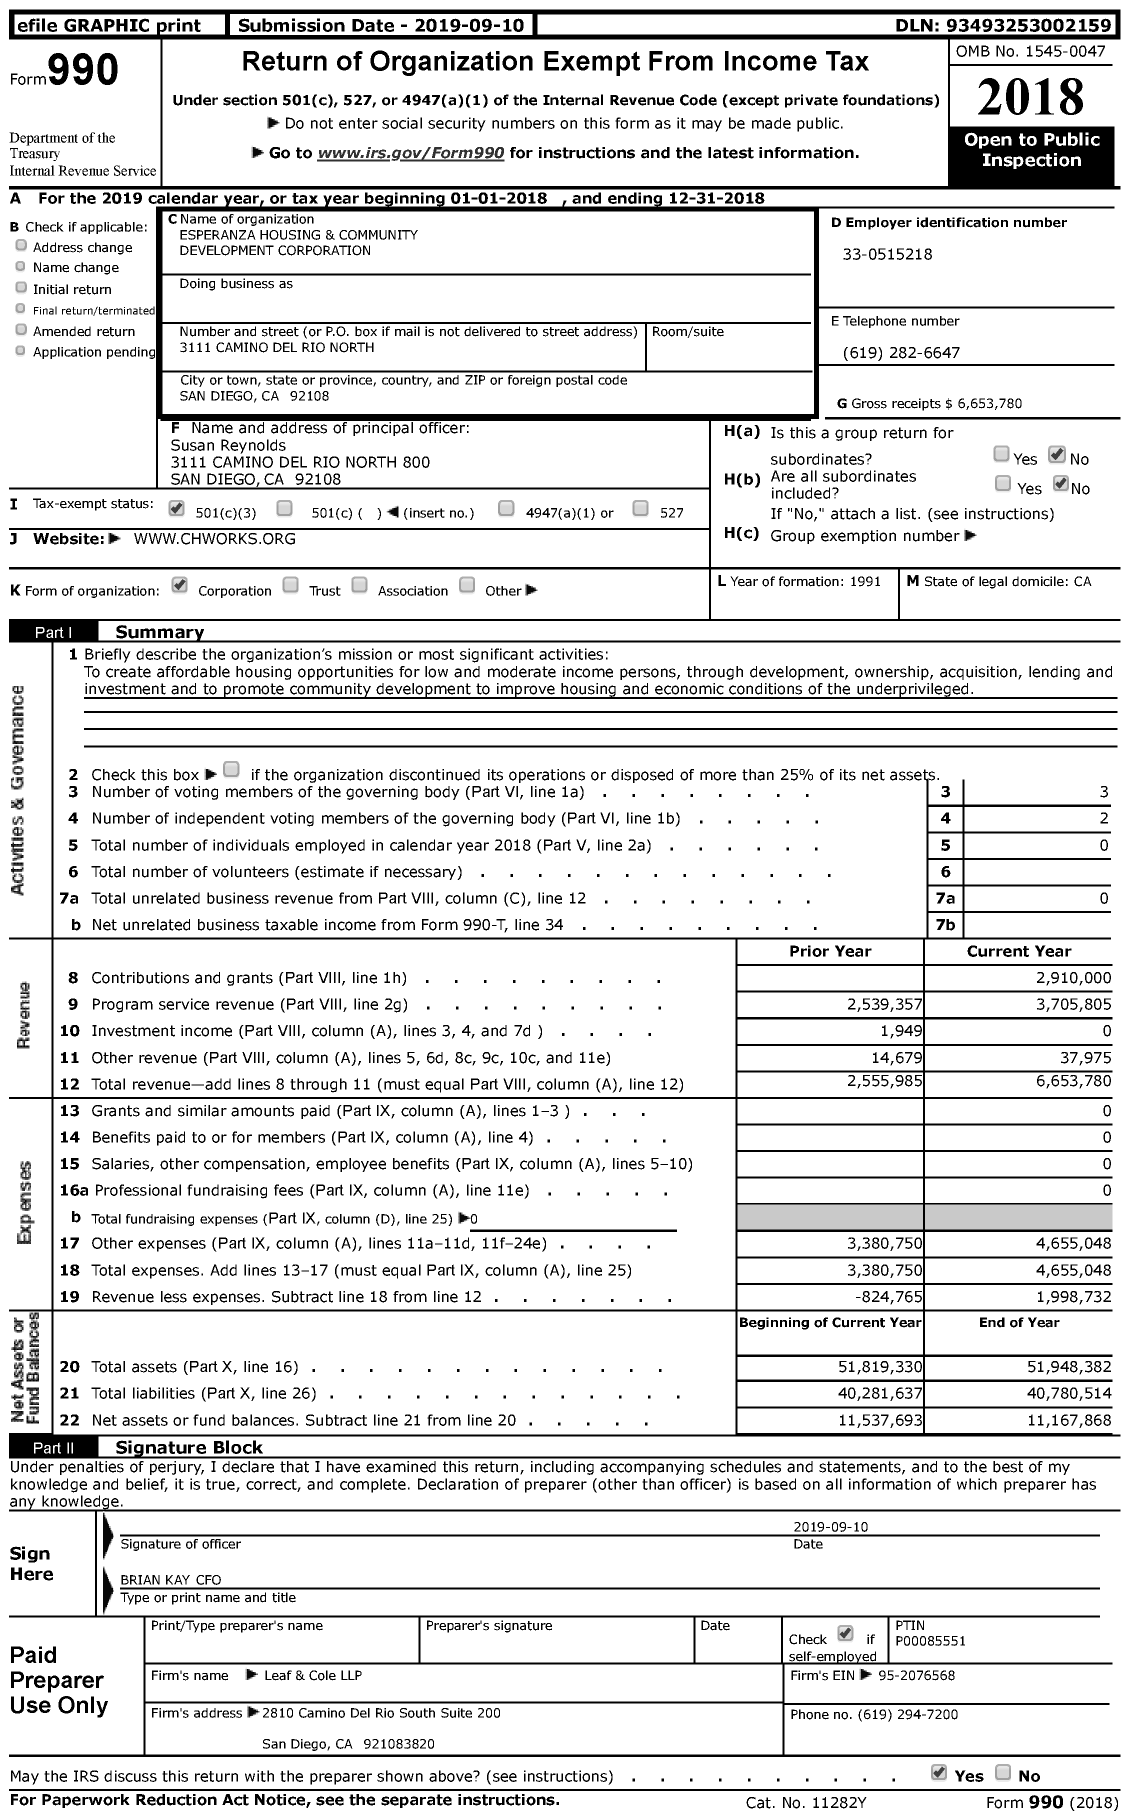 Image of first page of 2018 Form 990 for Esperanza Housing and Community Development Corporation